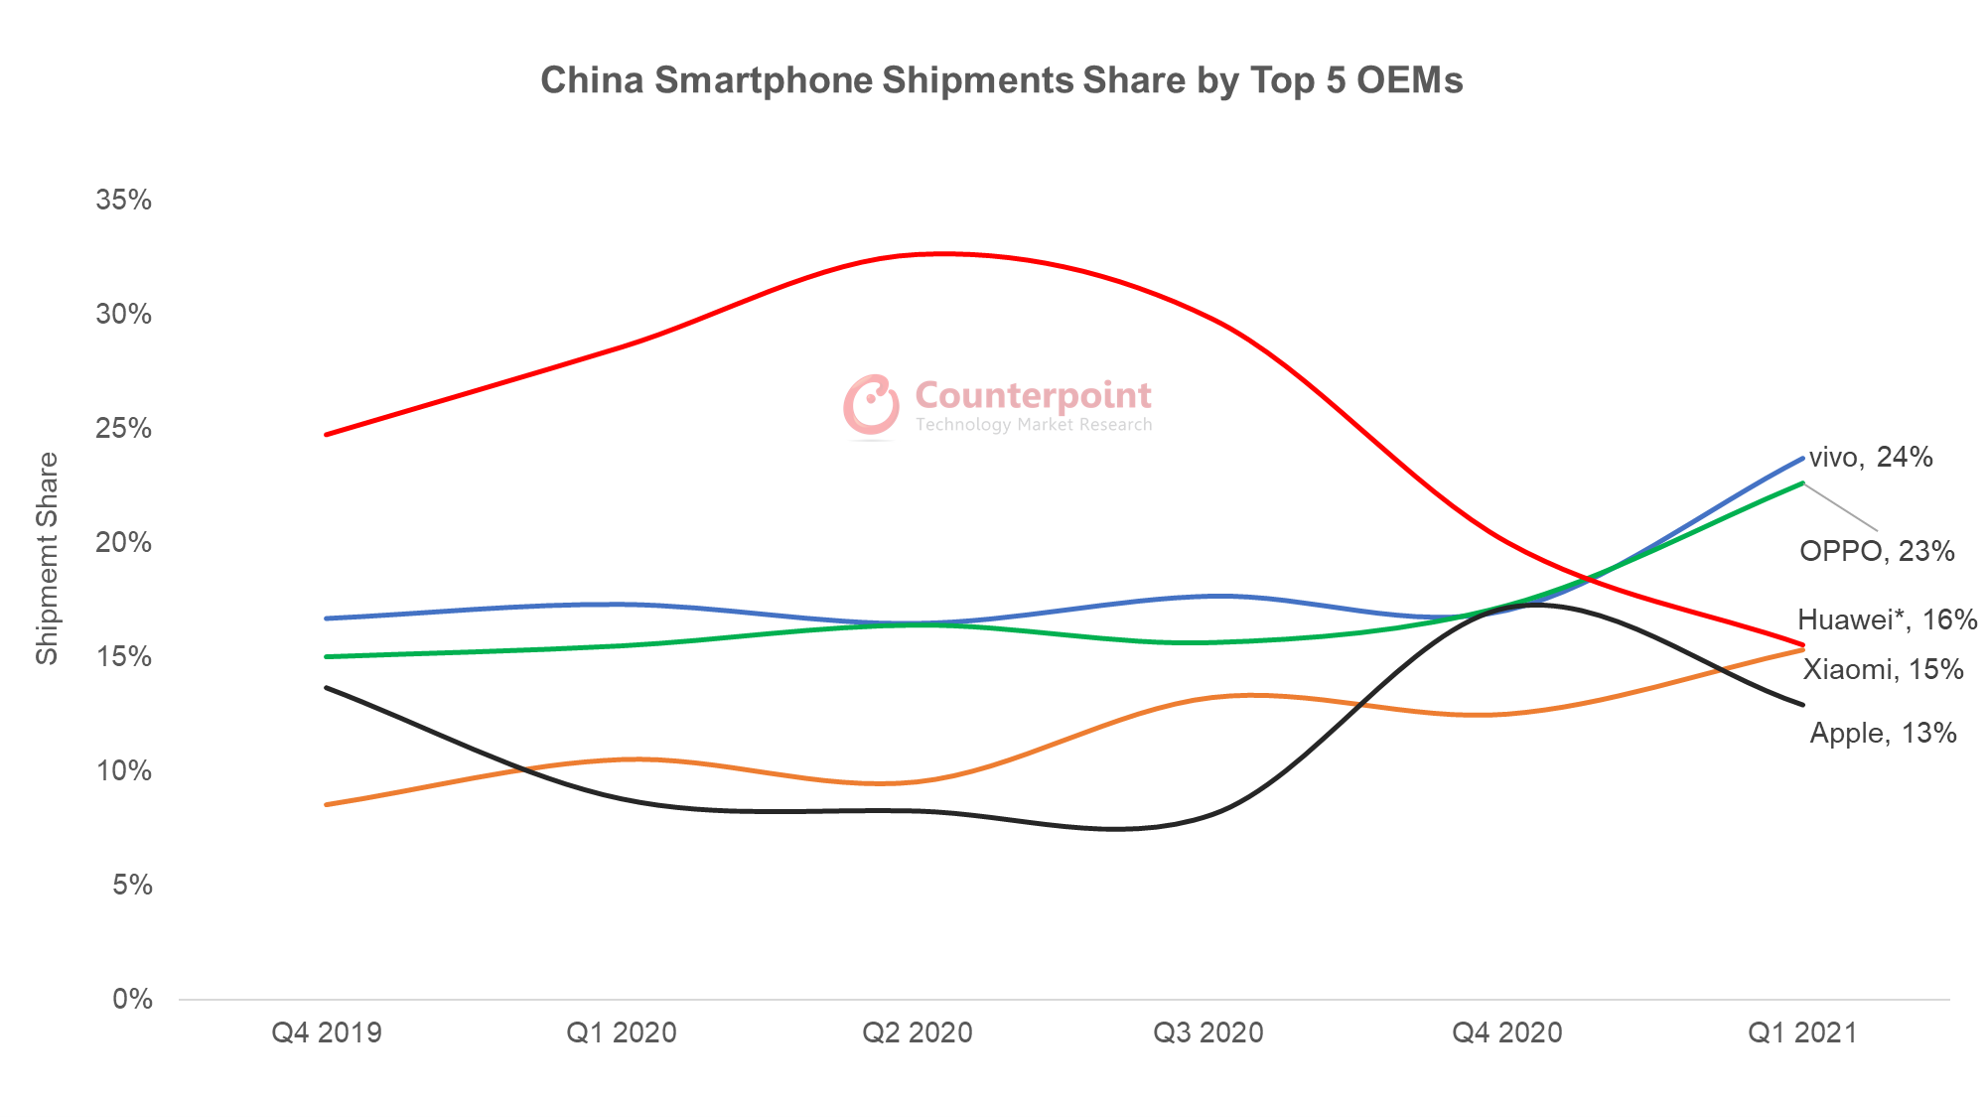 Counterpoint Research - China Smartphone Shipments Share Q1 2021